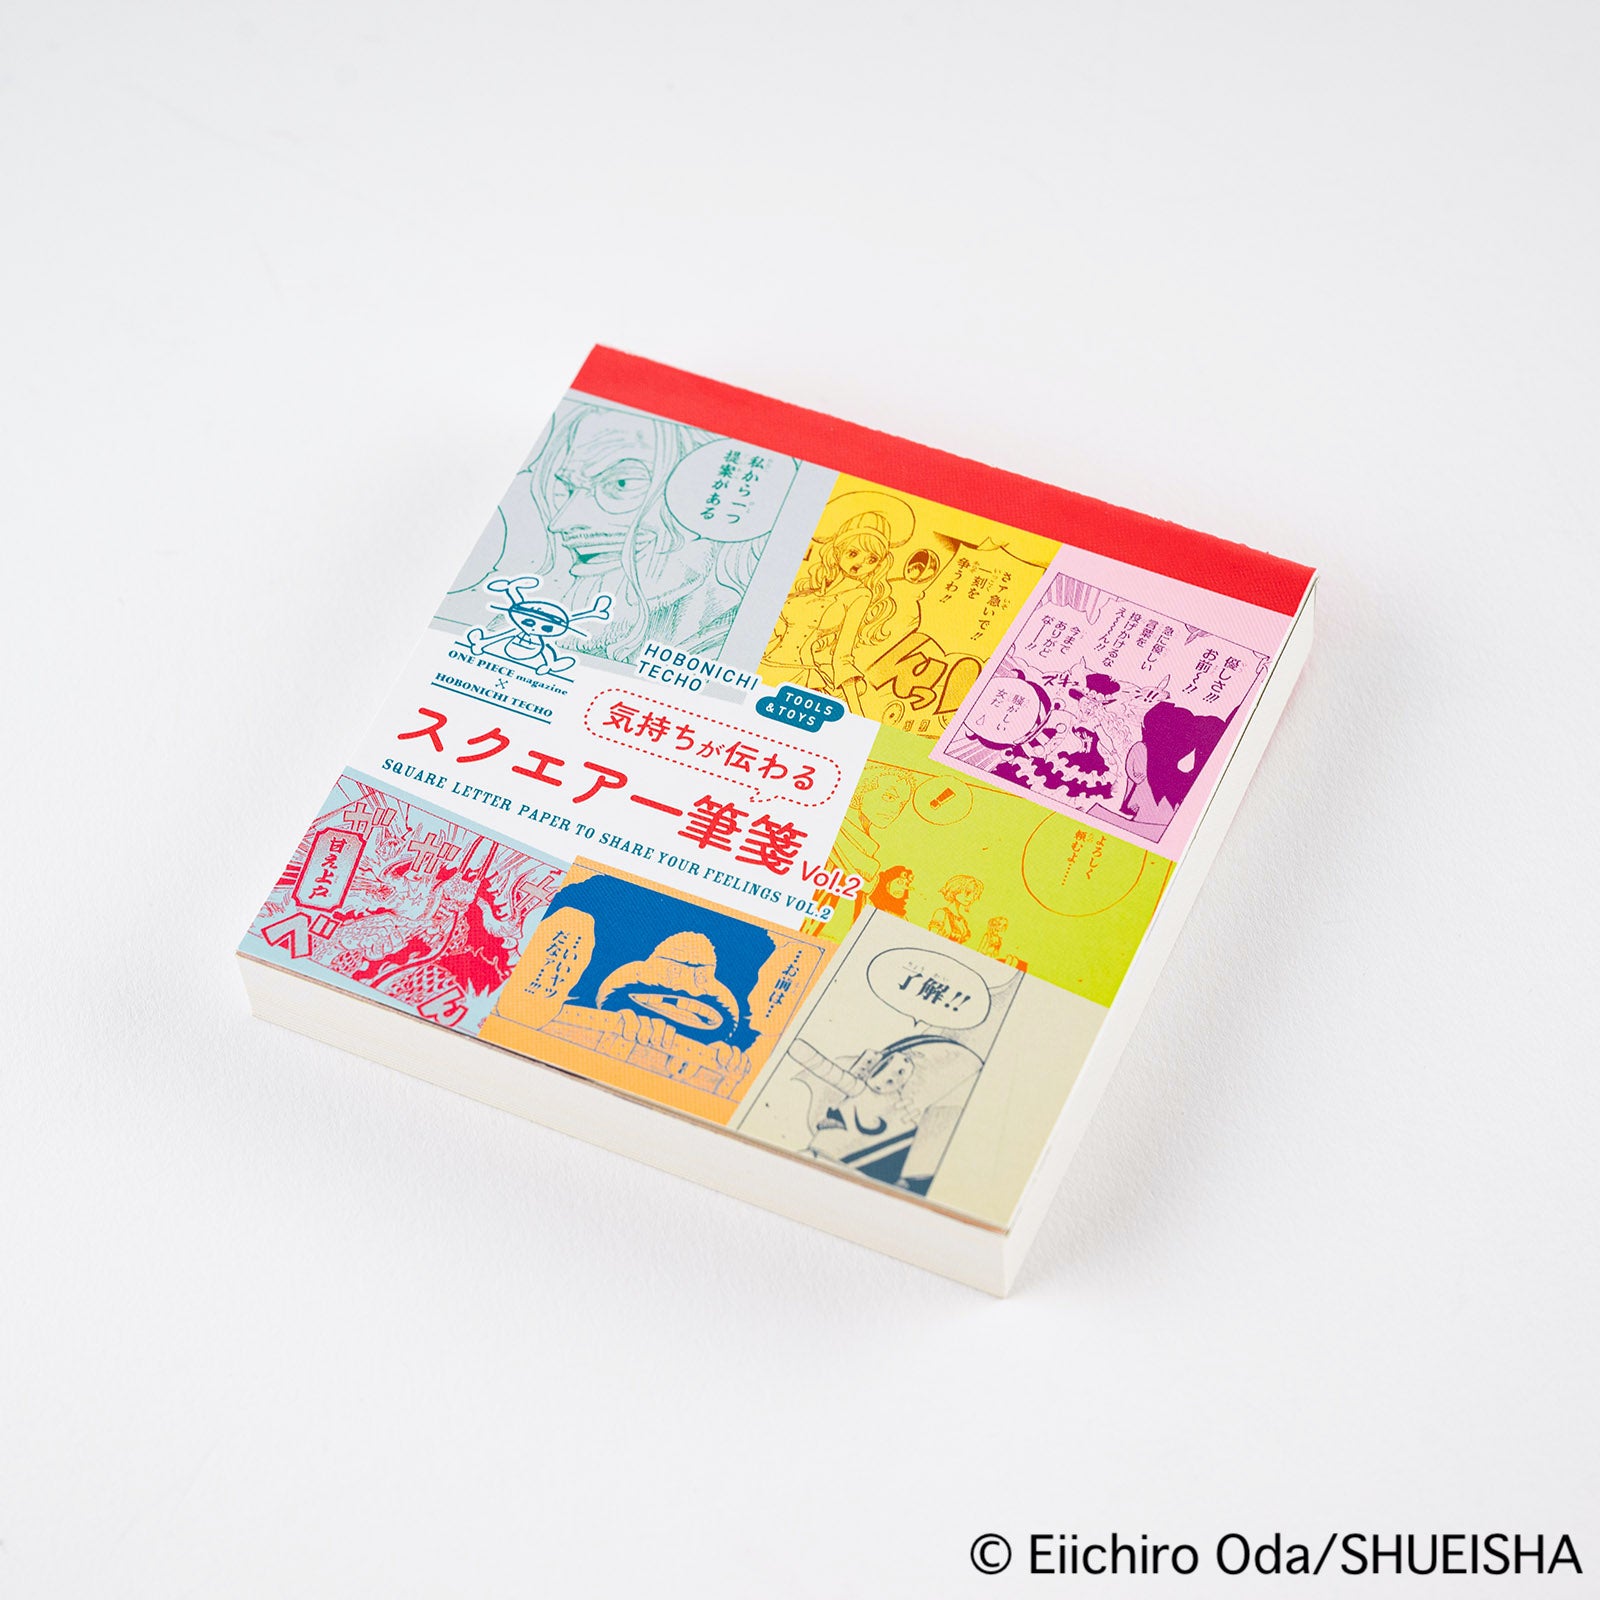 Hobonichi ONE PIECE magazine: Square Letter Paper to Share Your Feelings Vol.2